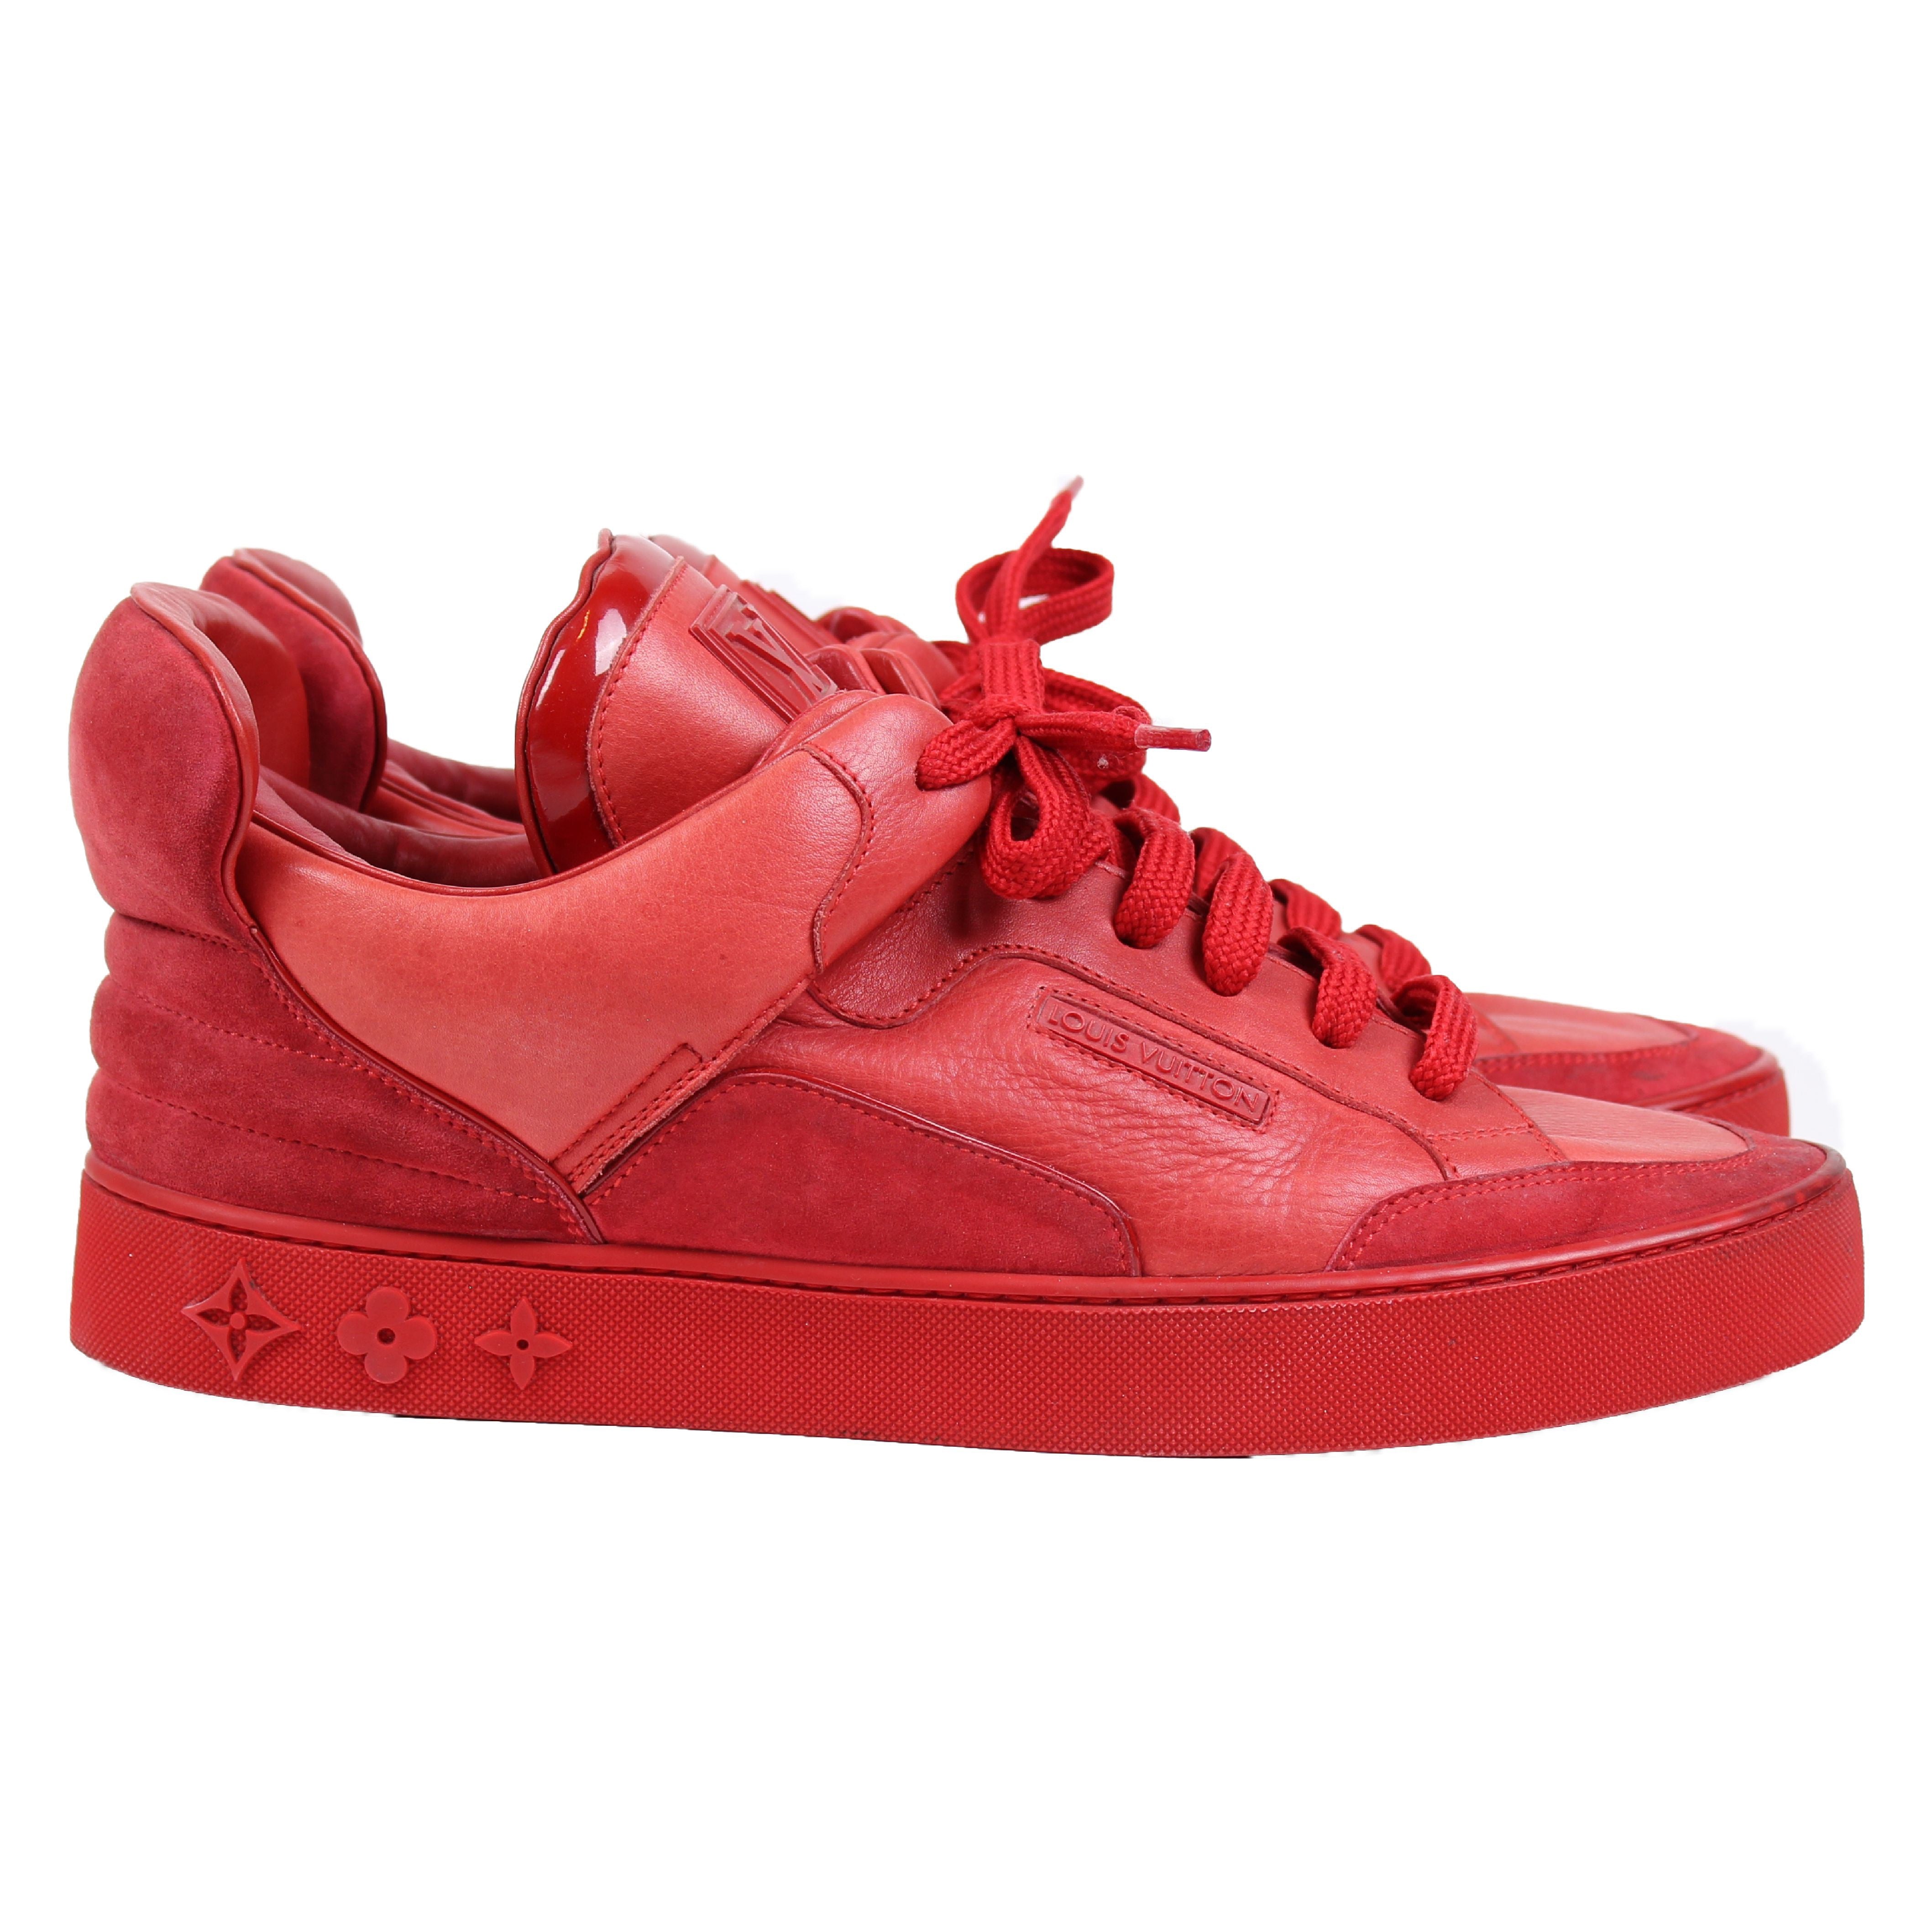 red louis vuitton shoes made of｜TikTok Search